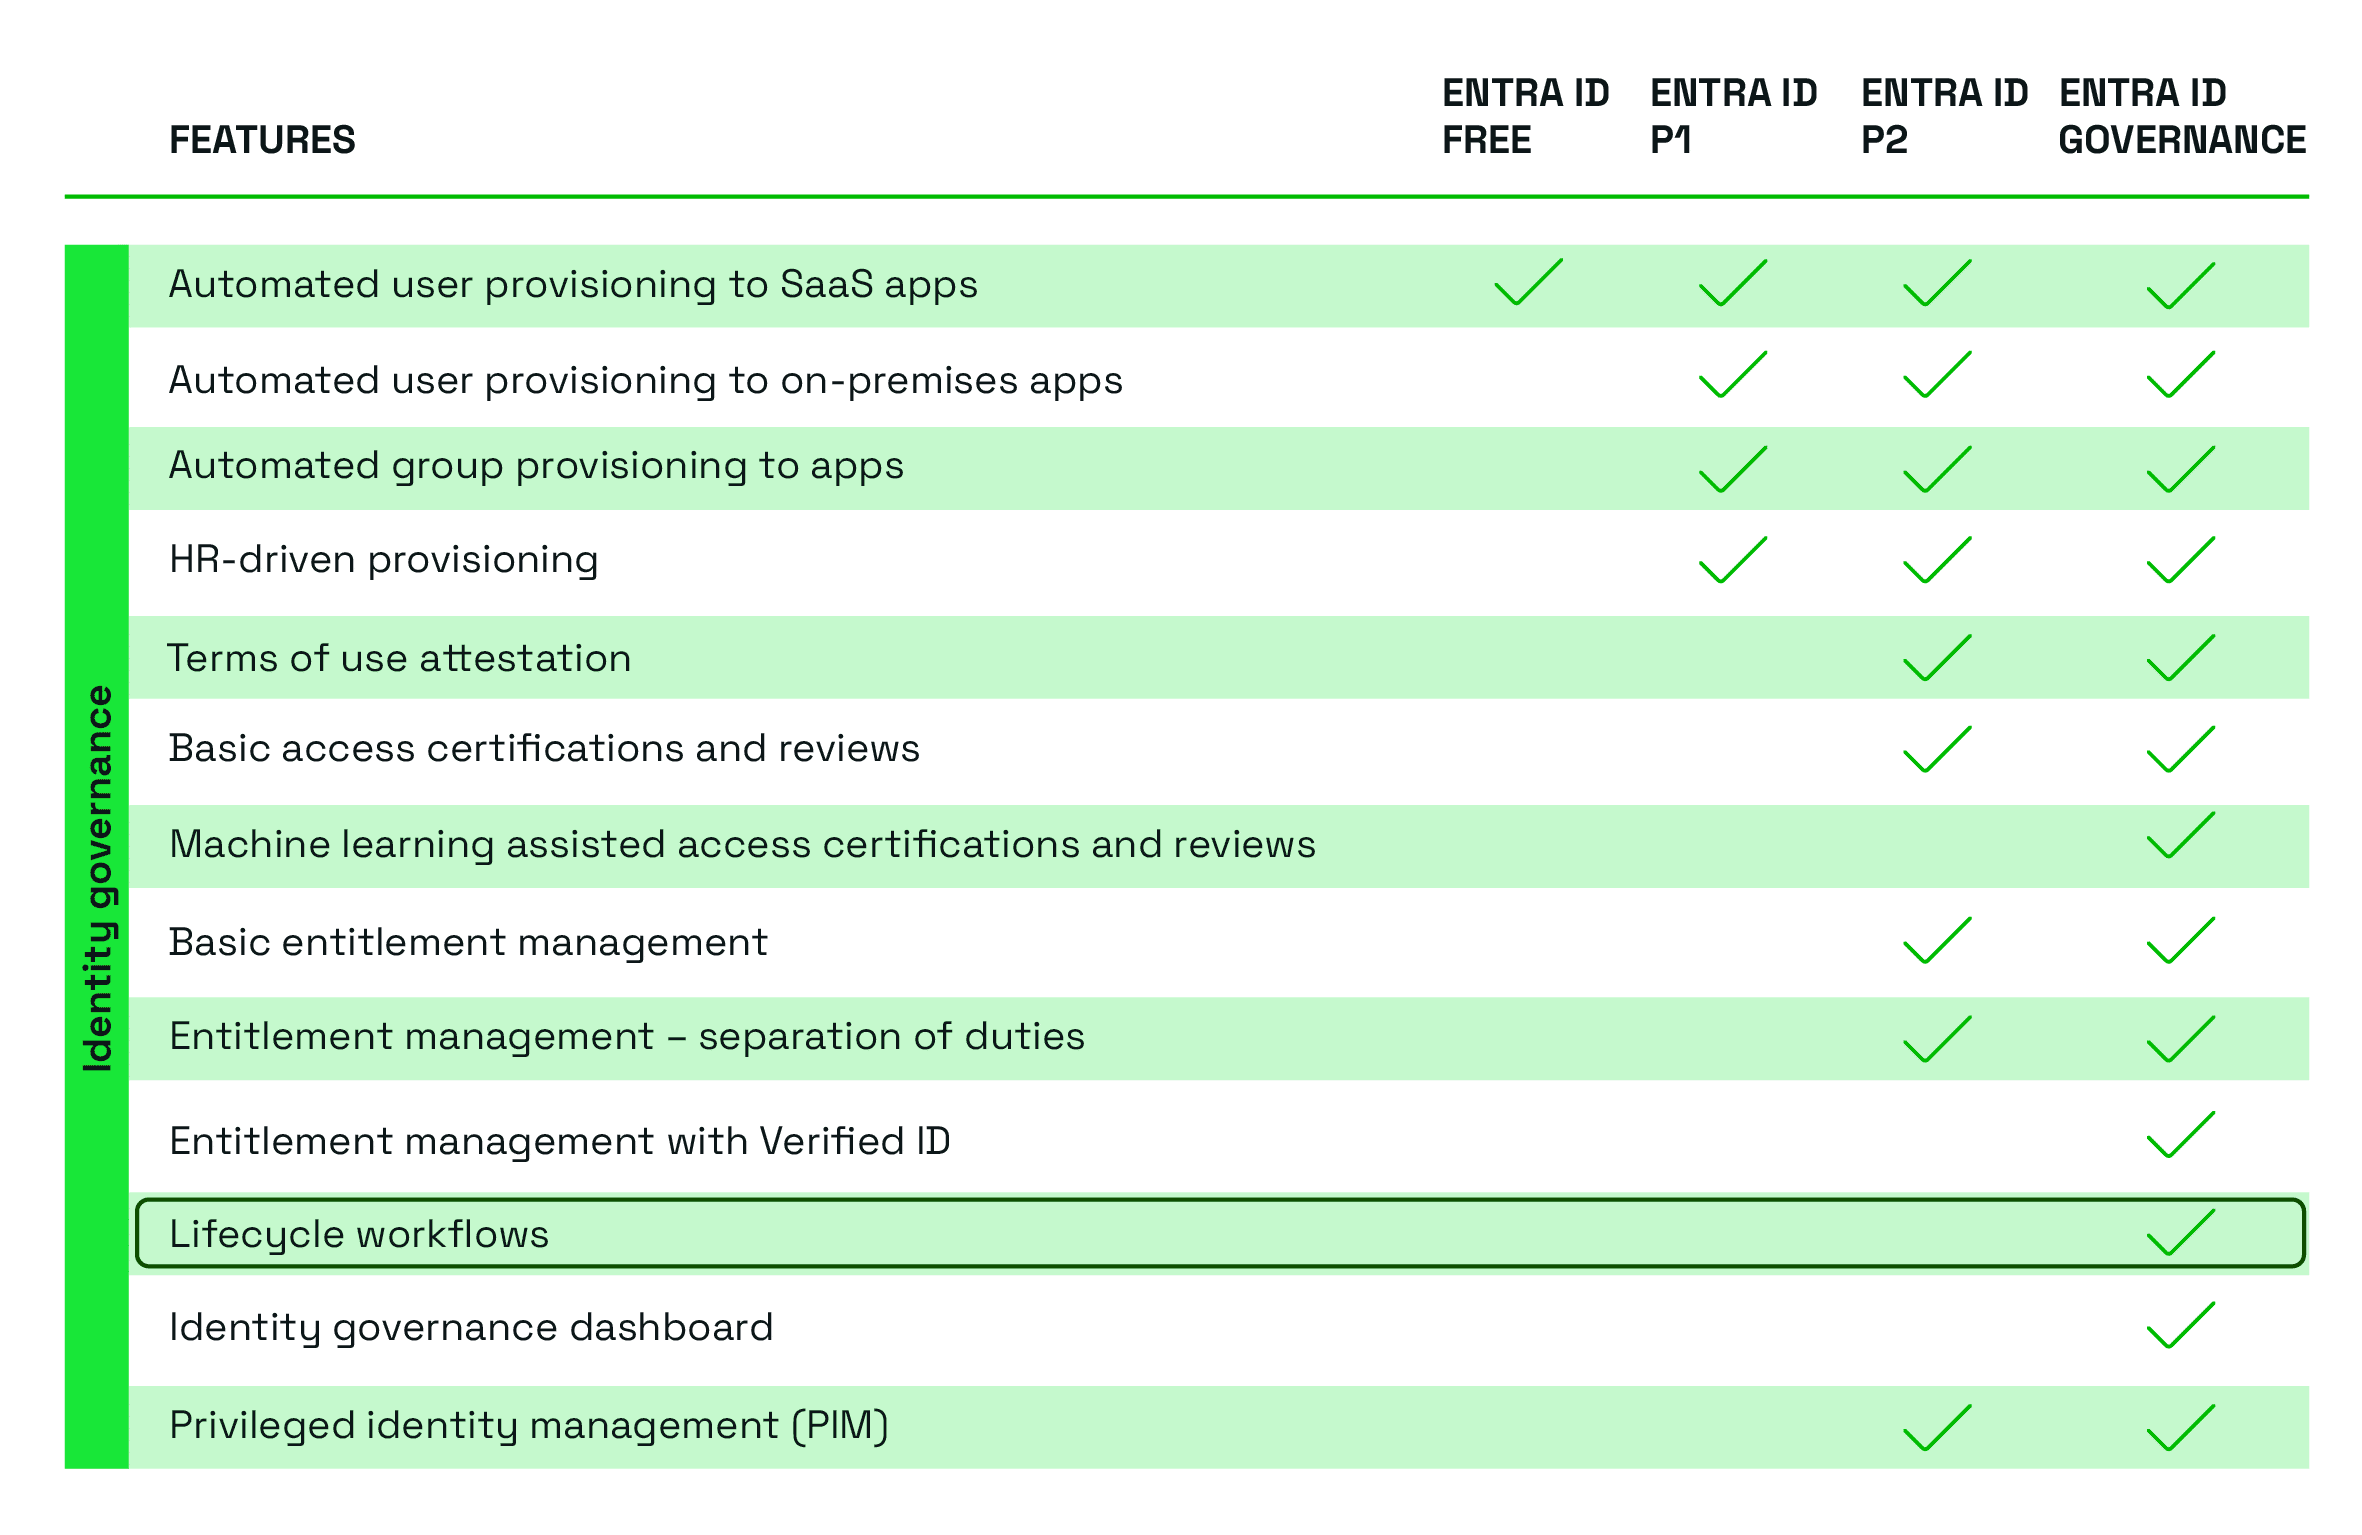 Comparison chart of features and licencing in Entra ID Governance